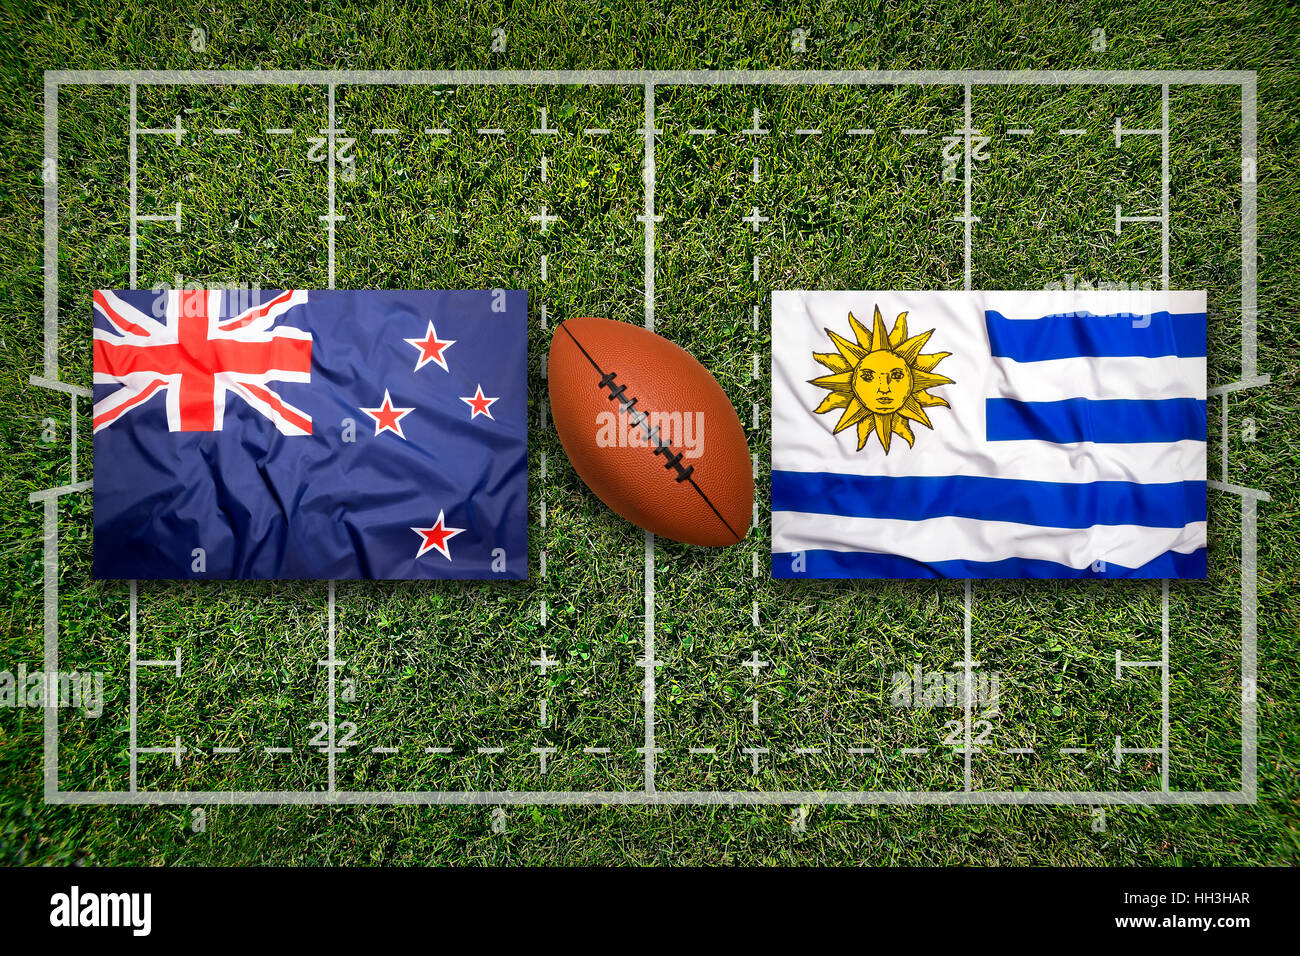 New Zealand vs. Uruguay flags on green rugby field Stock Photo